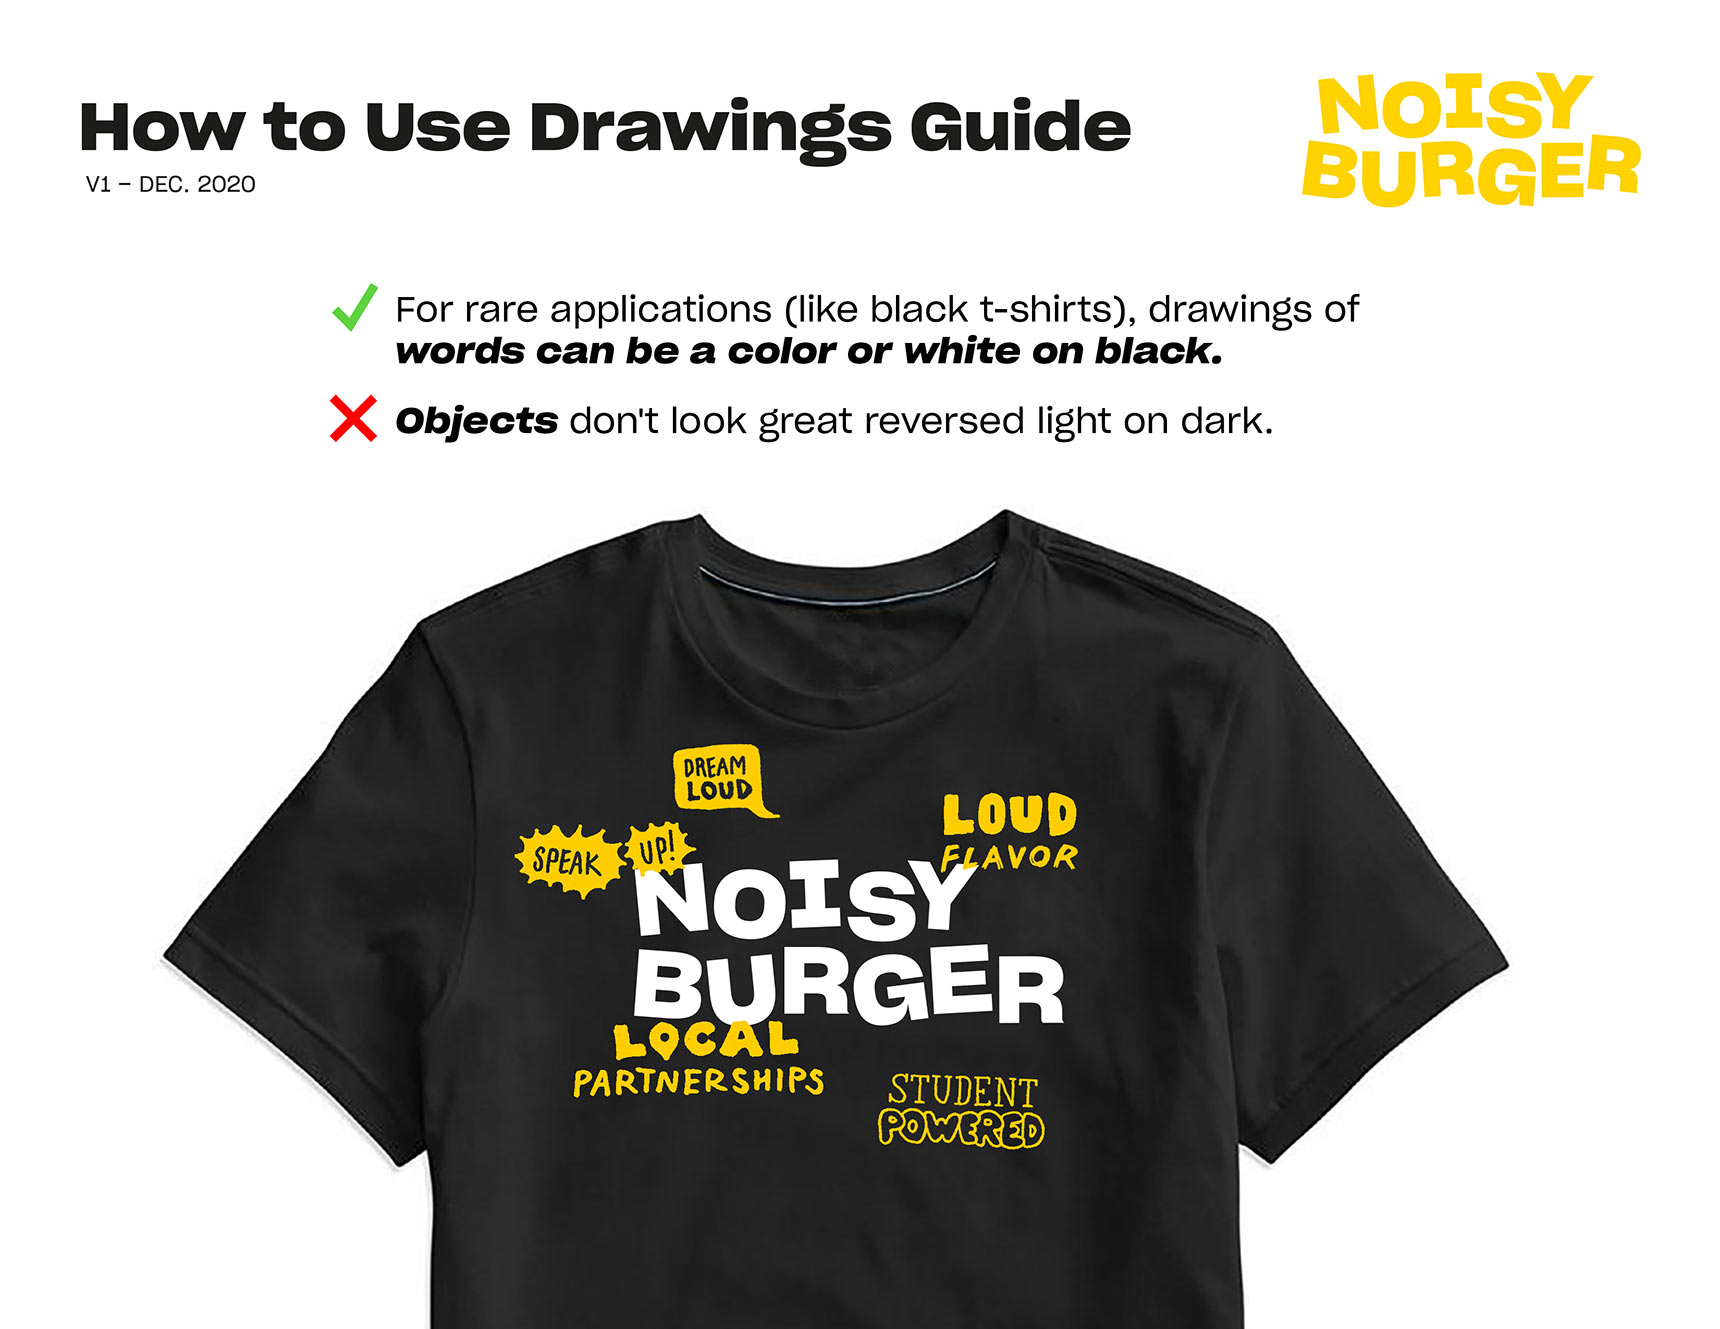 Noisy Burger style guide